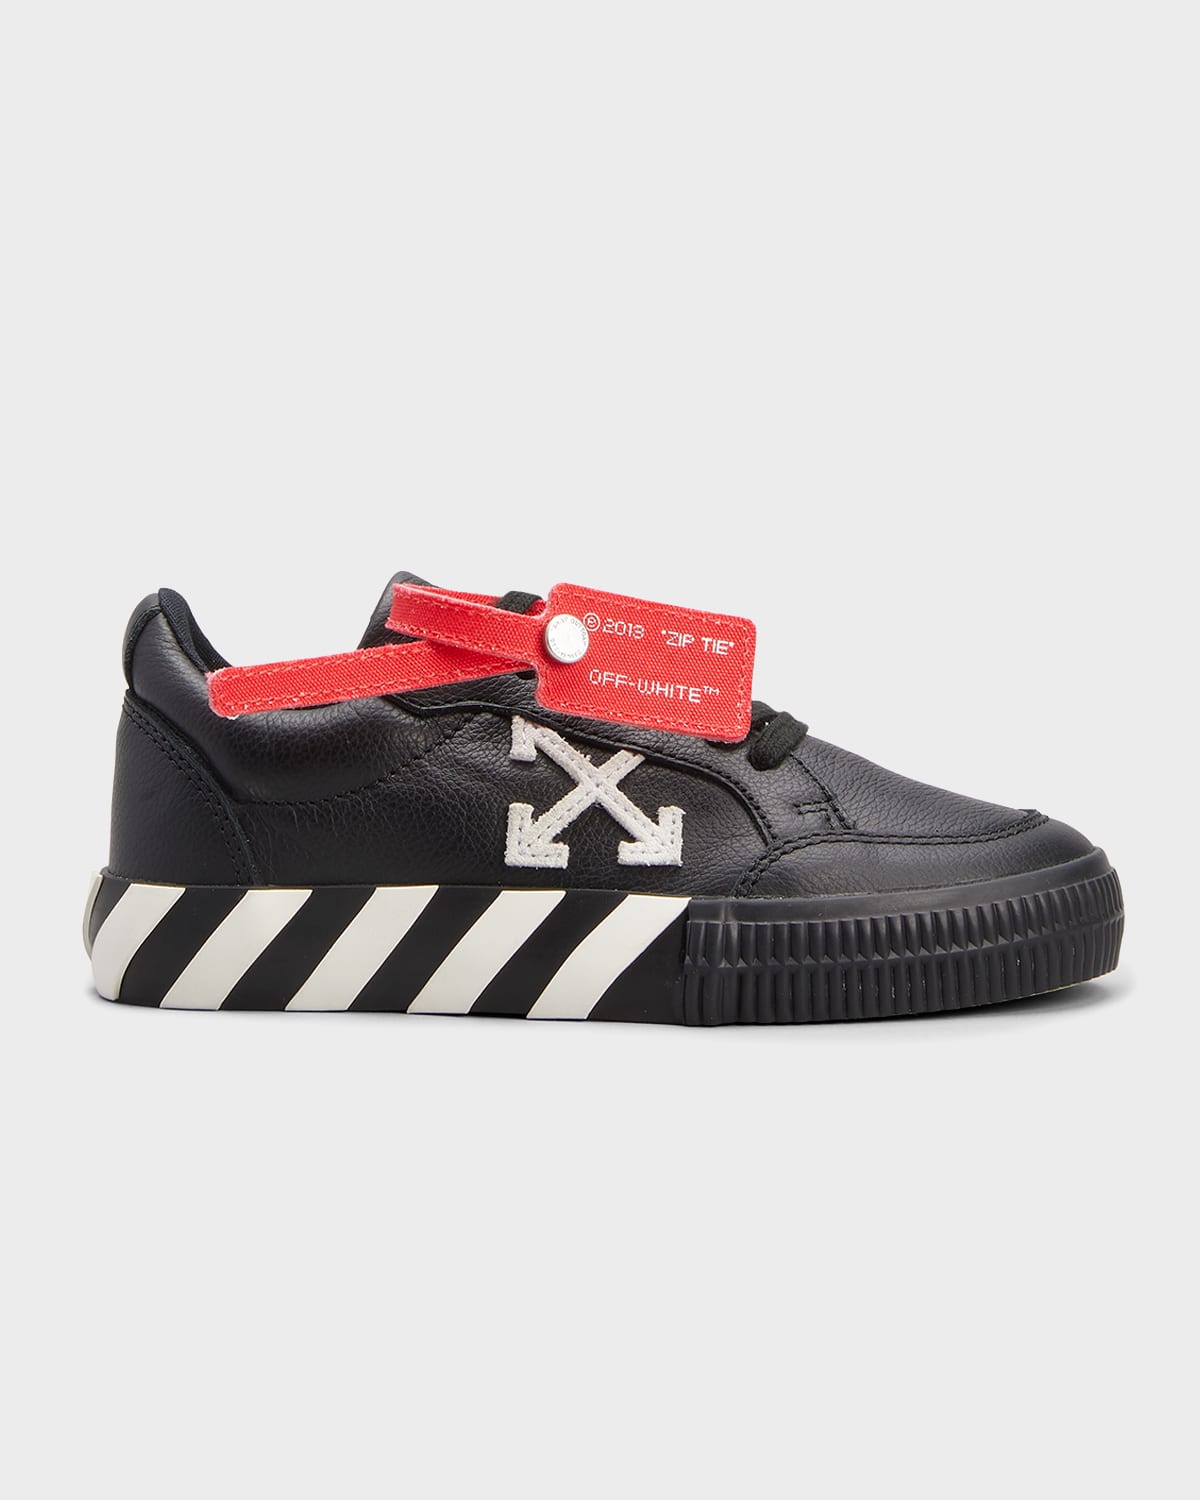 OFF-WHITE KID'S ARROW LEATHER LOW-TOP SNEAKERS, TODDLER/KIDS